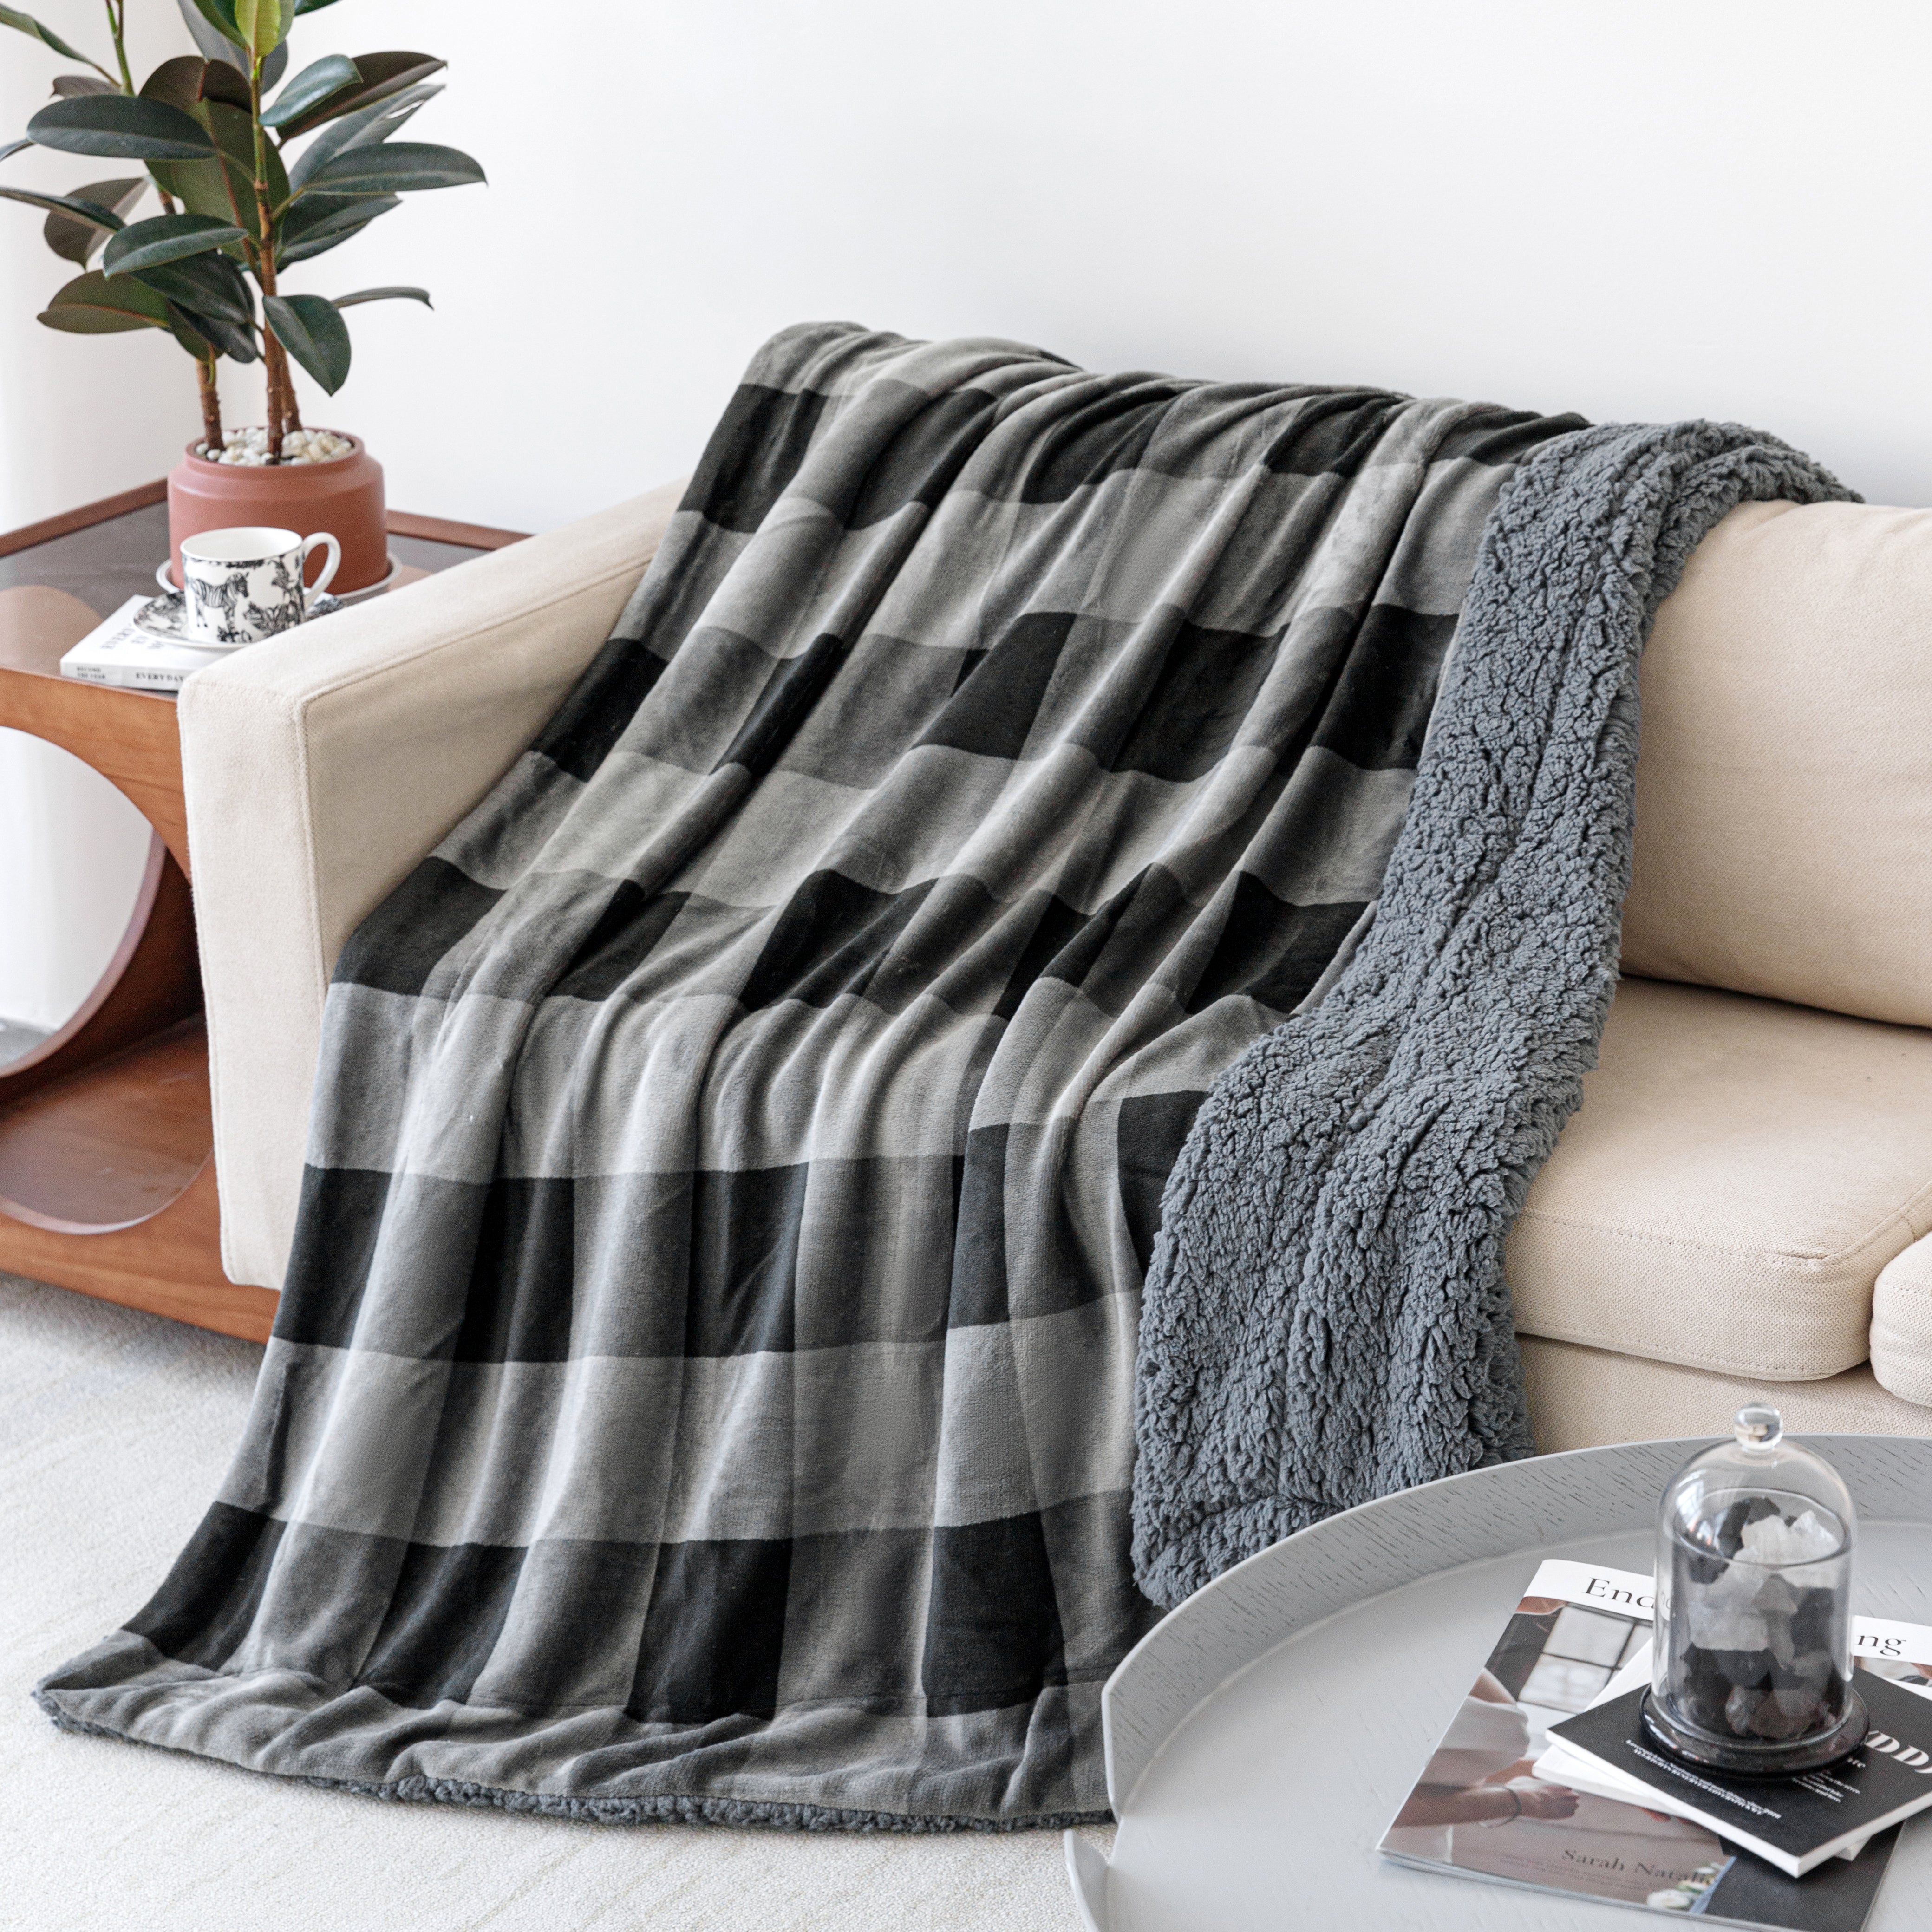 Velvet to Sherpa Throw Blanket 50 x 60 inches Charcoal Buffalo Check to Grey